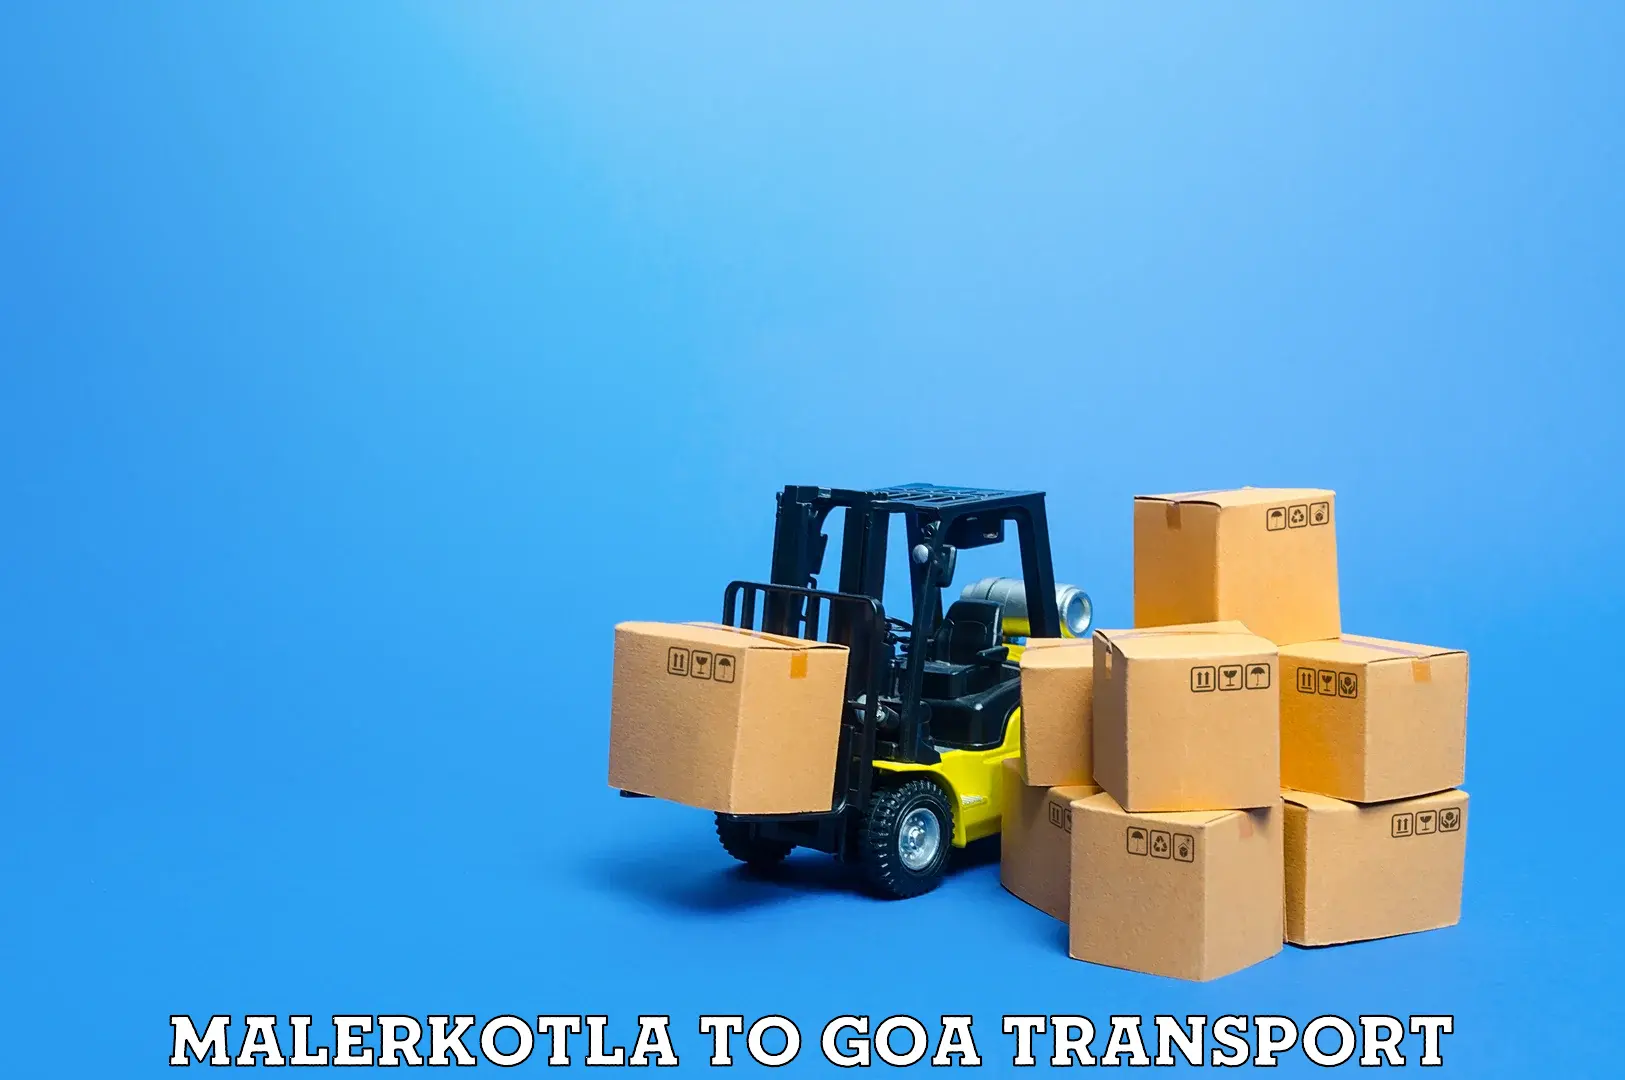 Transport bike from one state to another Malerkotla to Panaji